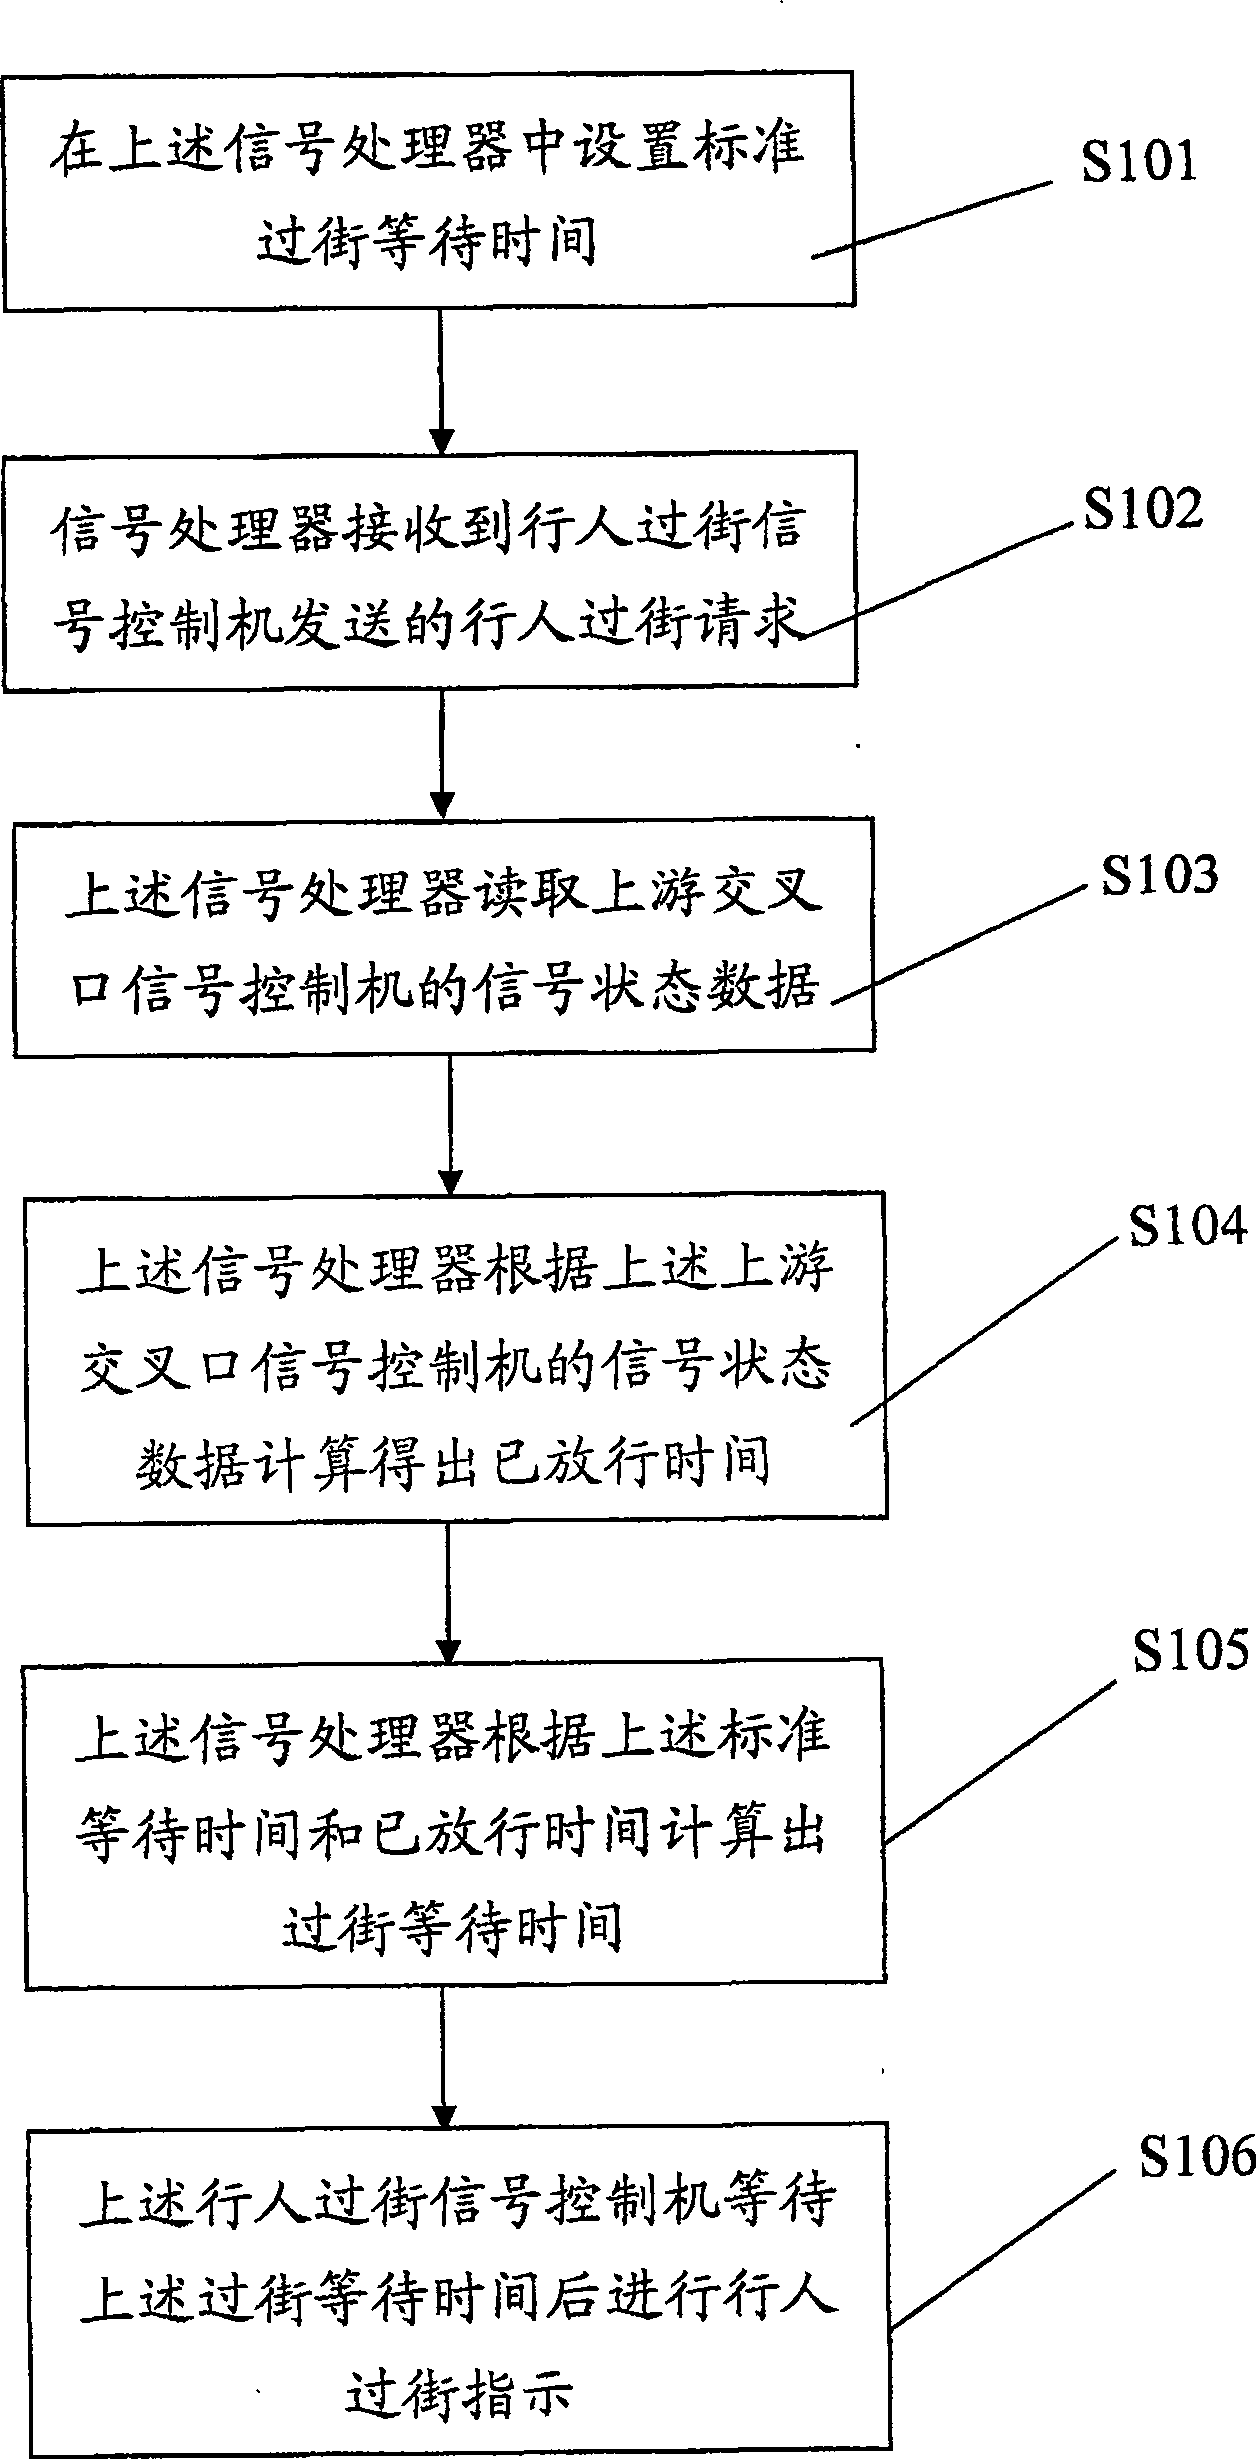 Traffic signal control system and method for pedestrian crossing road